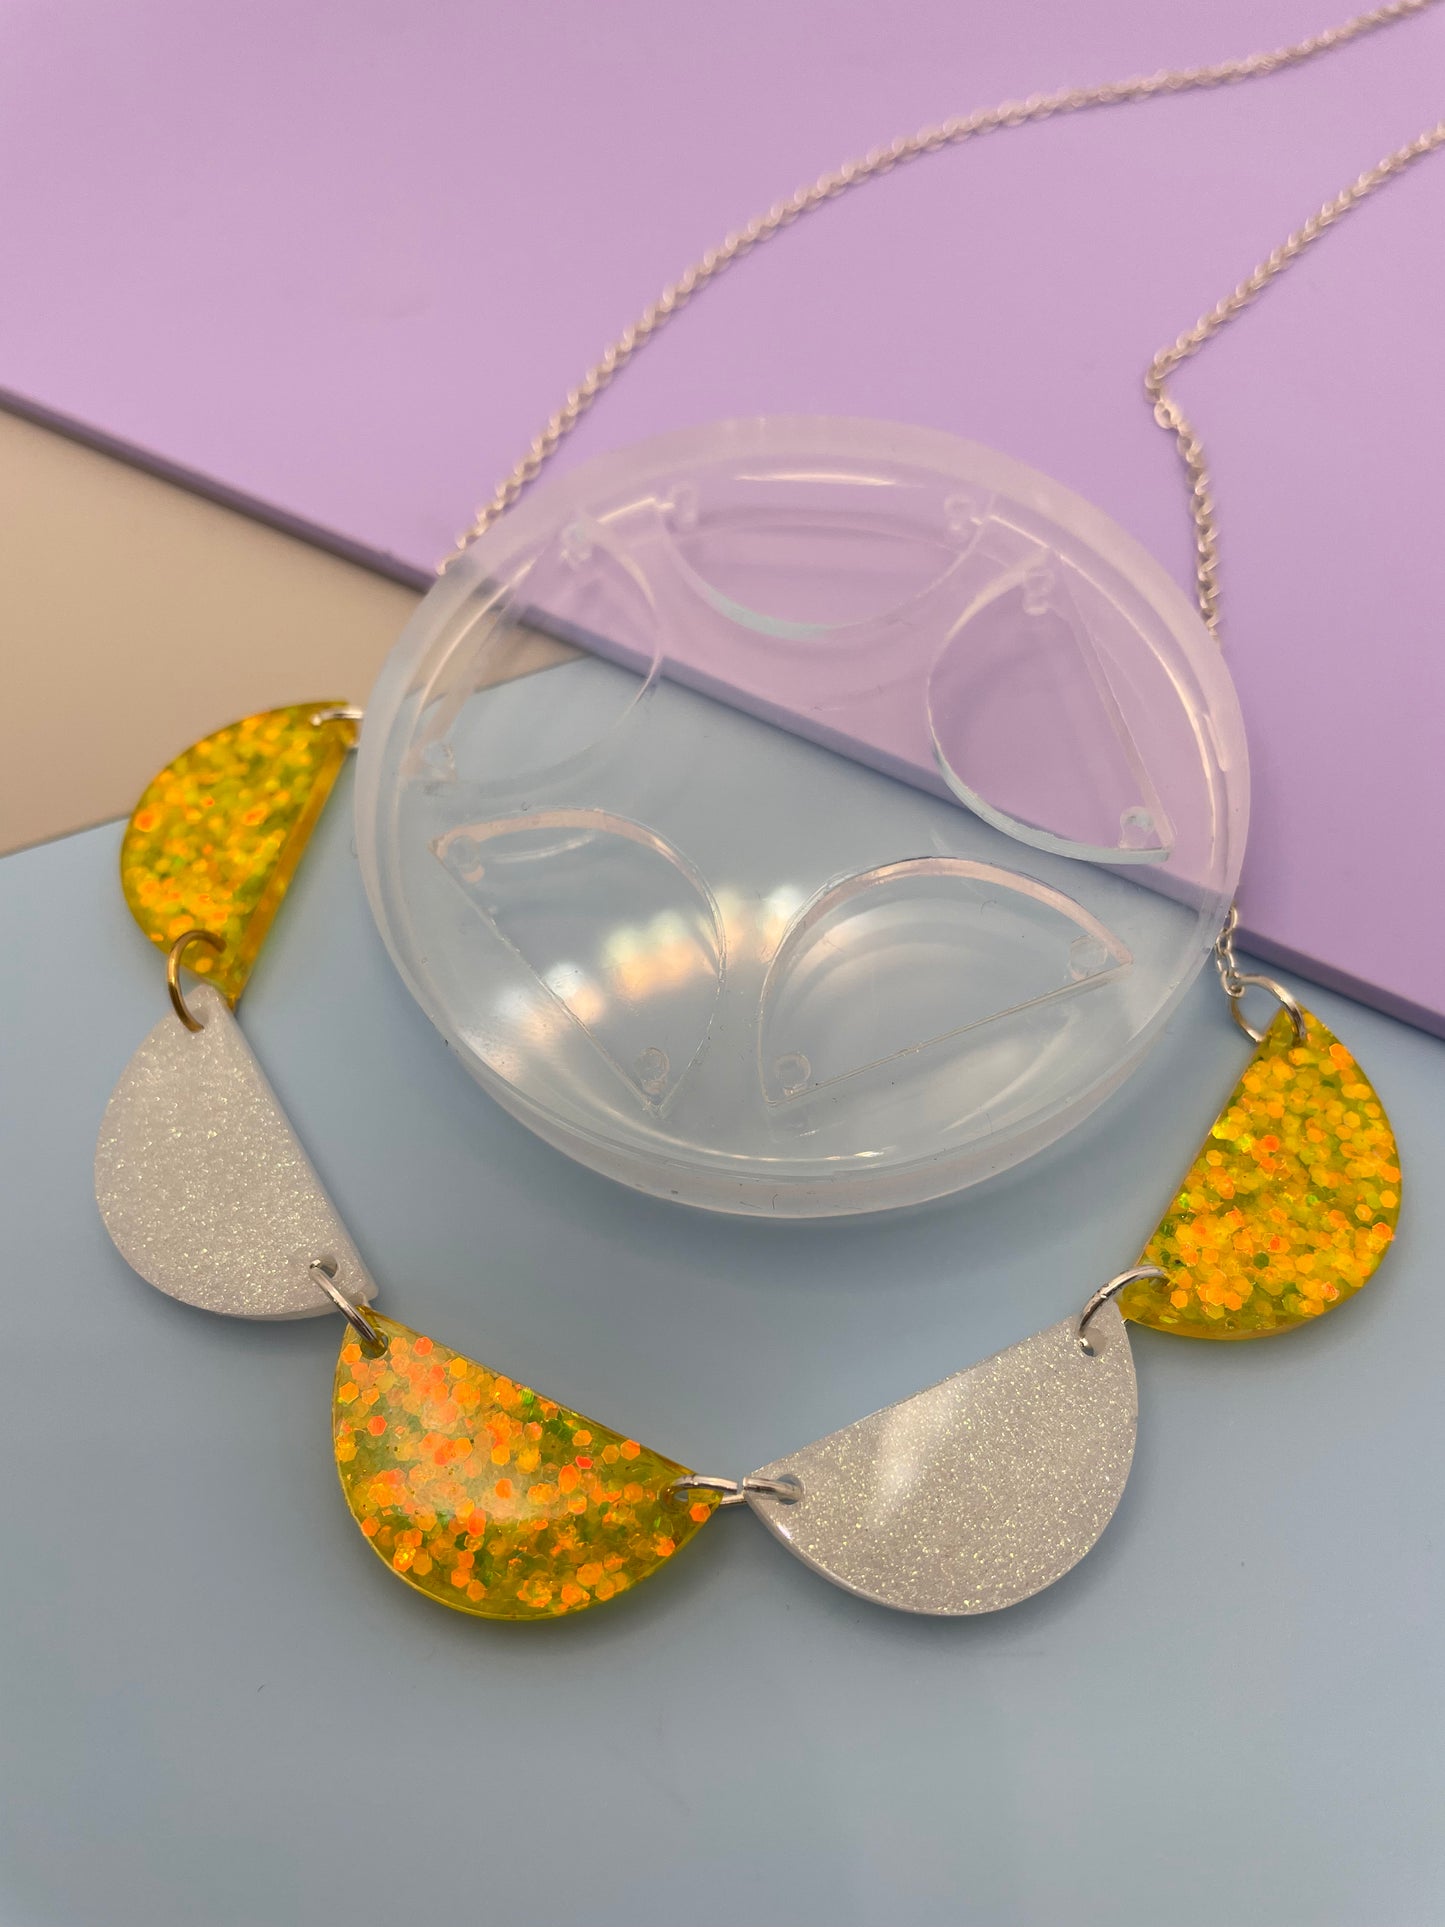 Scalloped Bib Round Bunting Necklace Mold